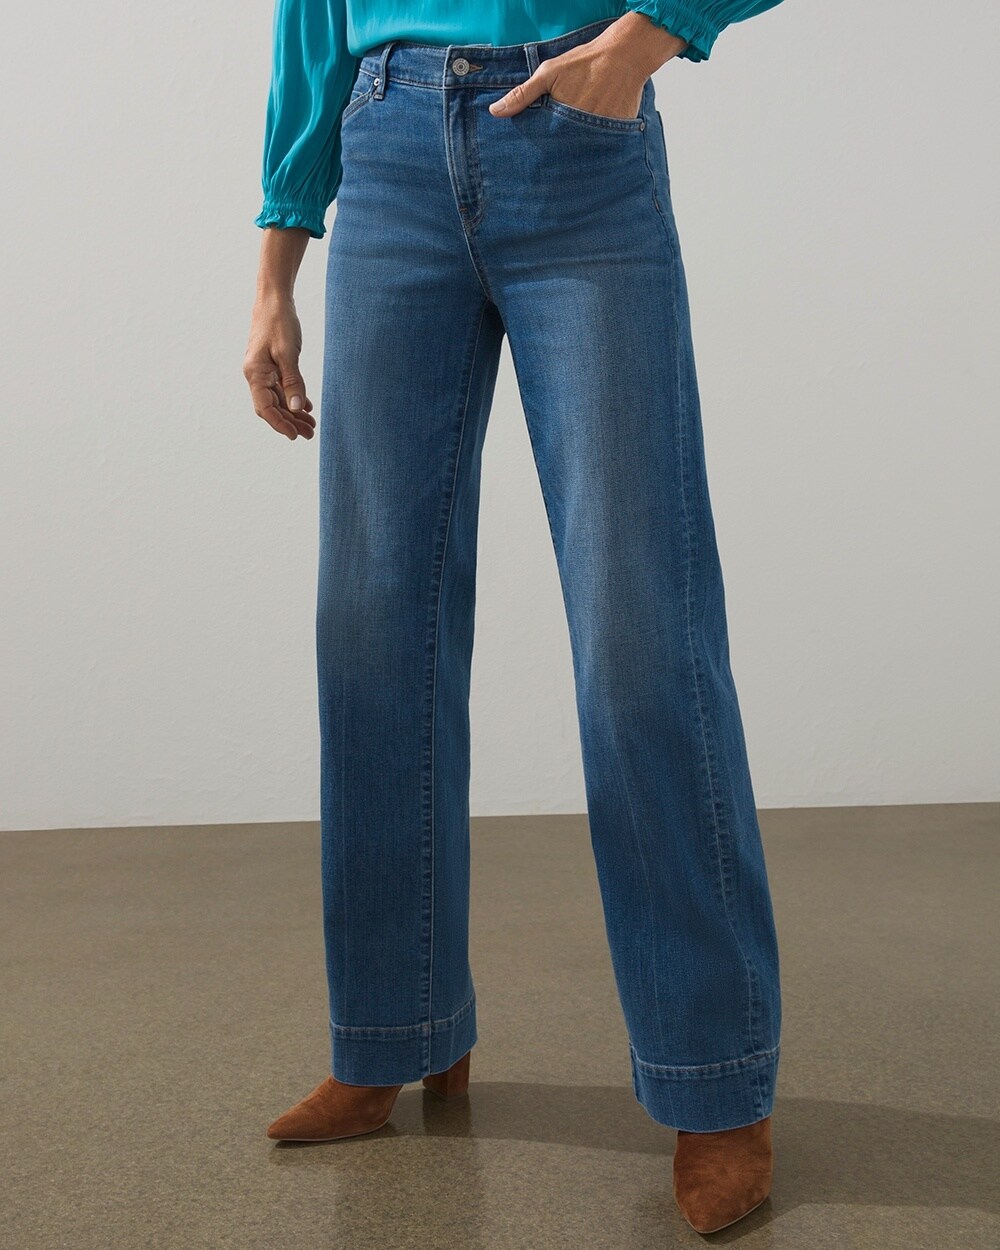 So Slimming\u00A0Girlfriend Ankle Jeans - Chico's